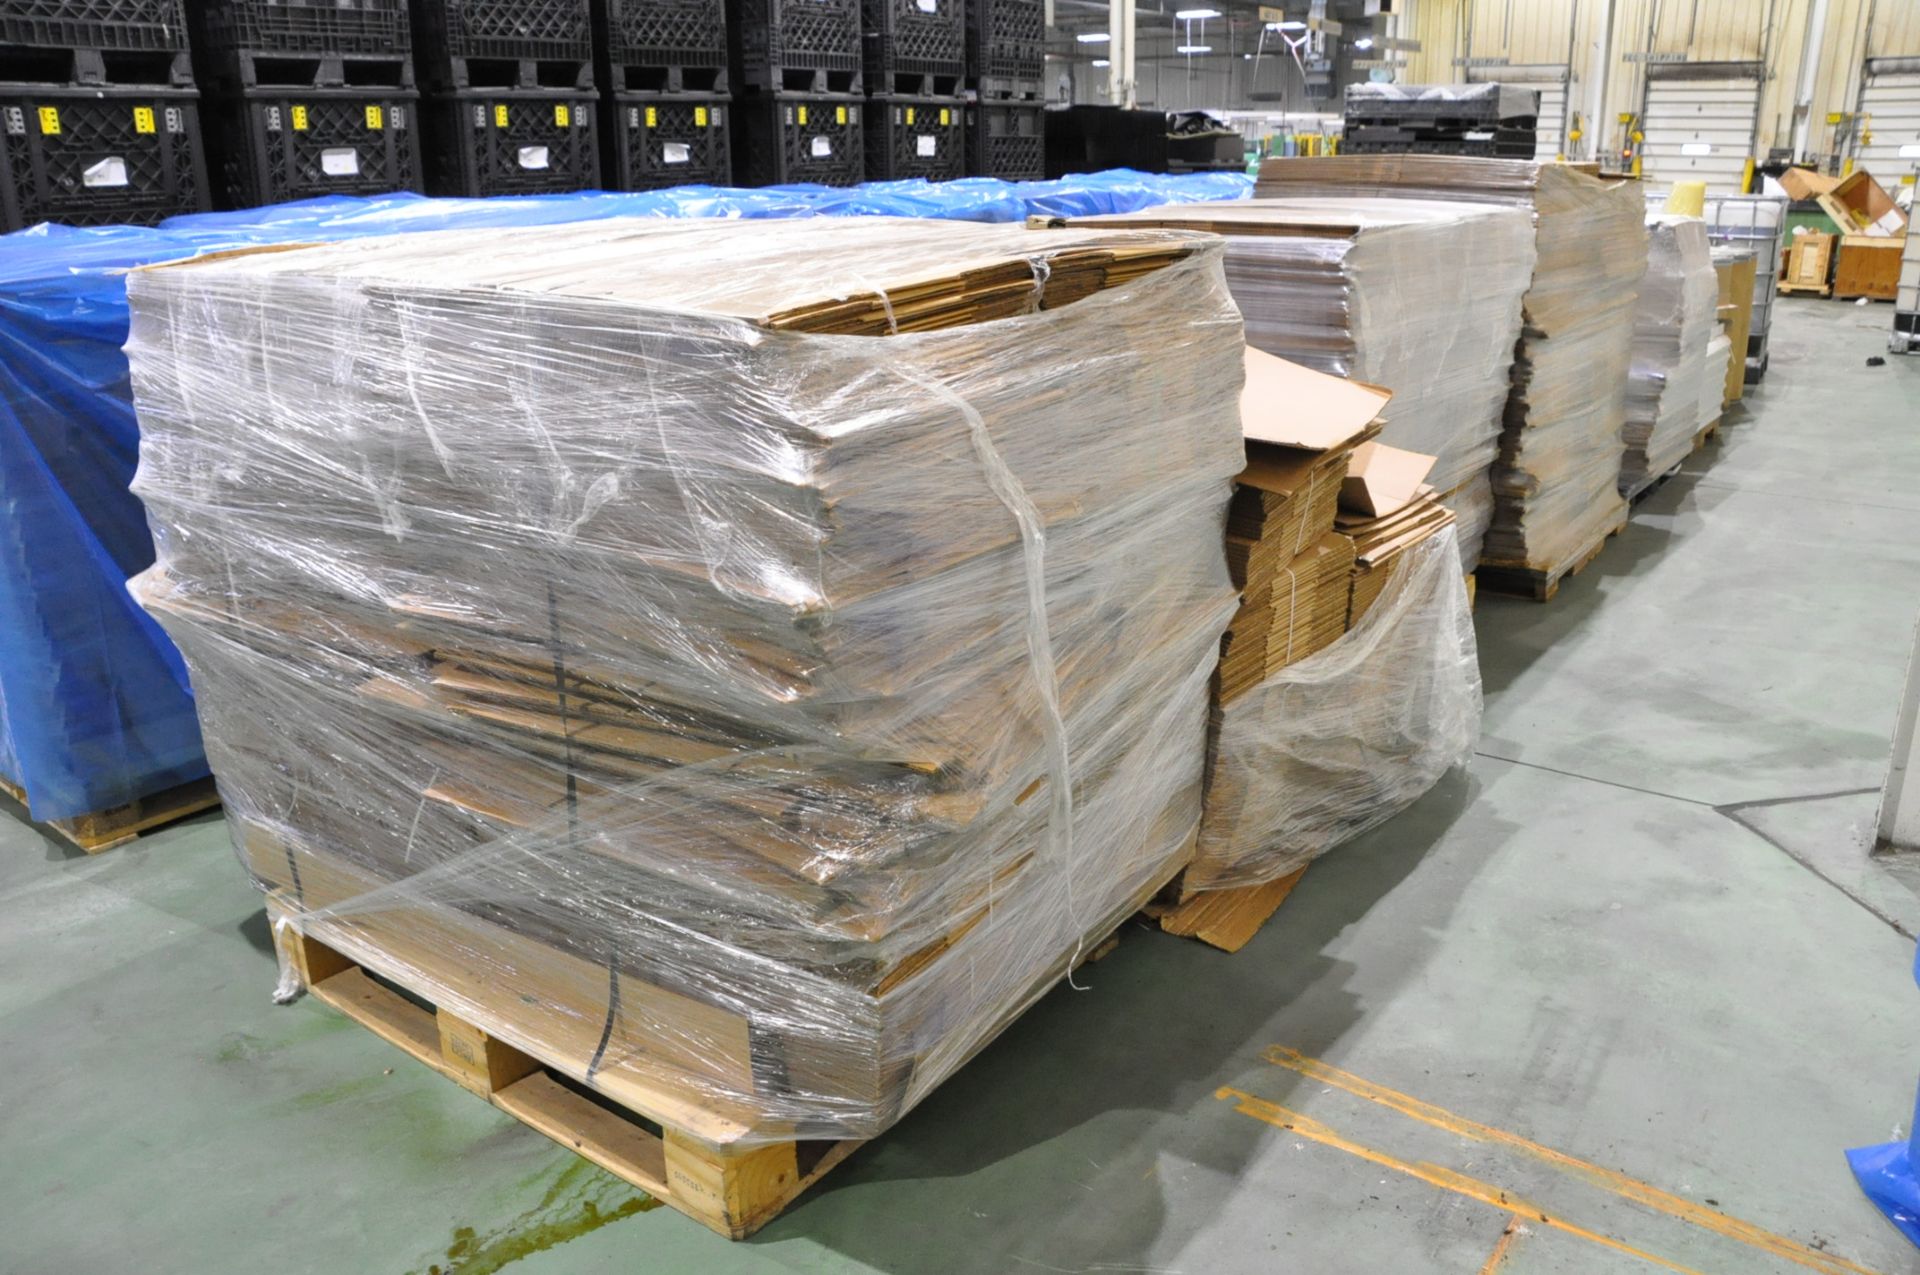 Lot-Various Cardboard Boxes on (5) Pallets in (1) Row, (A-9) - Image 2 of 2